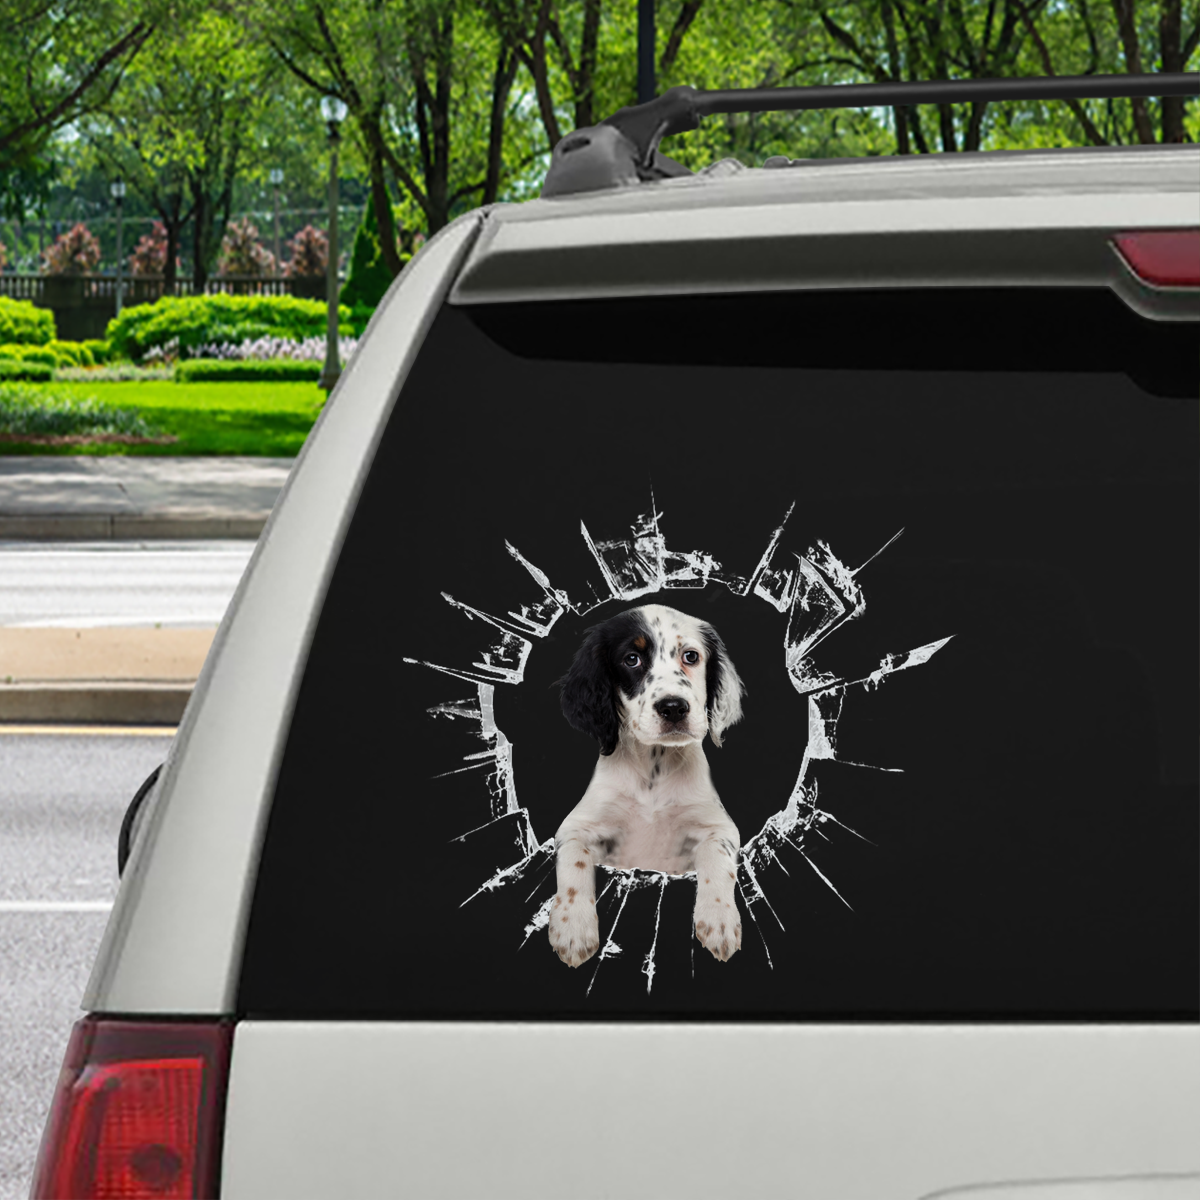 Get In - It's Time For Shopping - English Setter Car Sticker V1